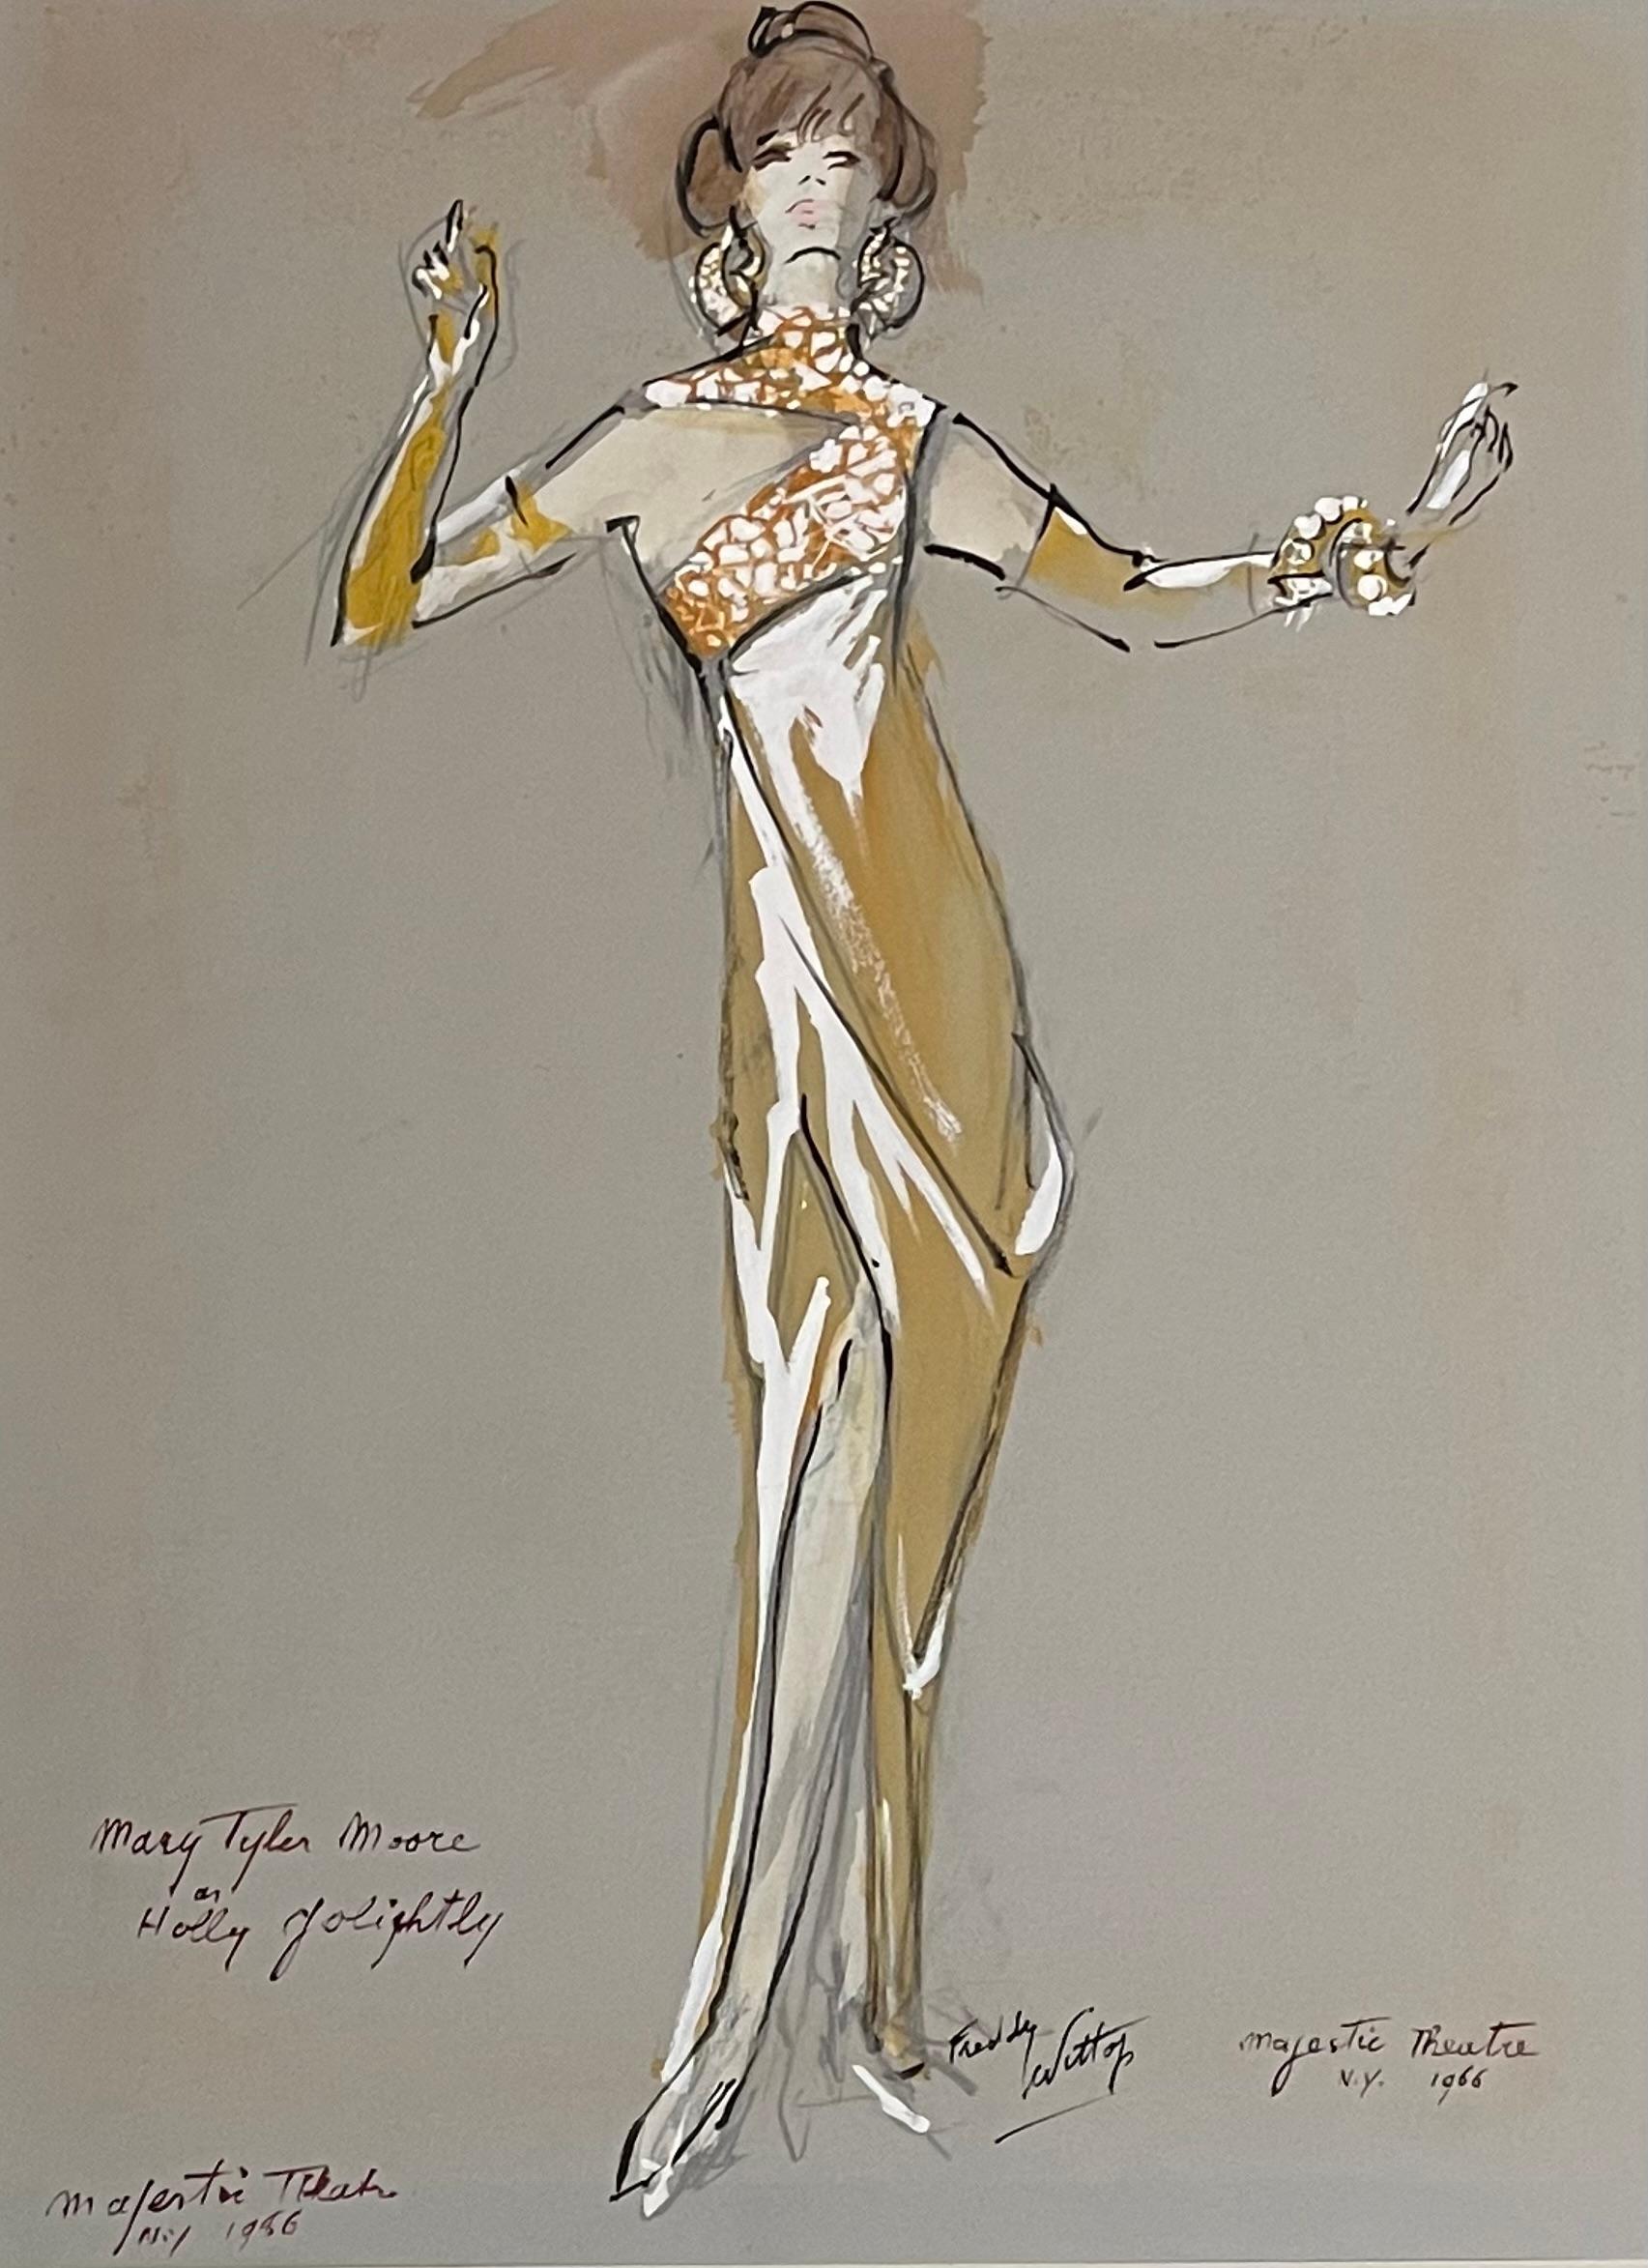 Mary Tyler Moore "Breakfast at Tiffany's" Original Broadway Costume Design 1960s - Mixed Media Art by Freddy Wittop